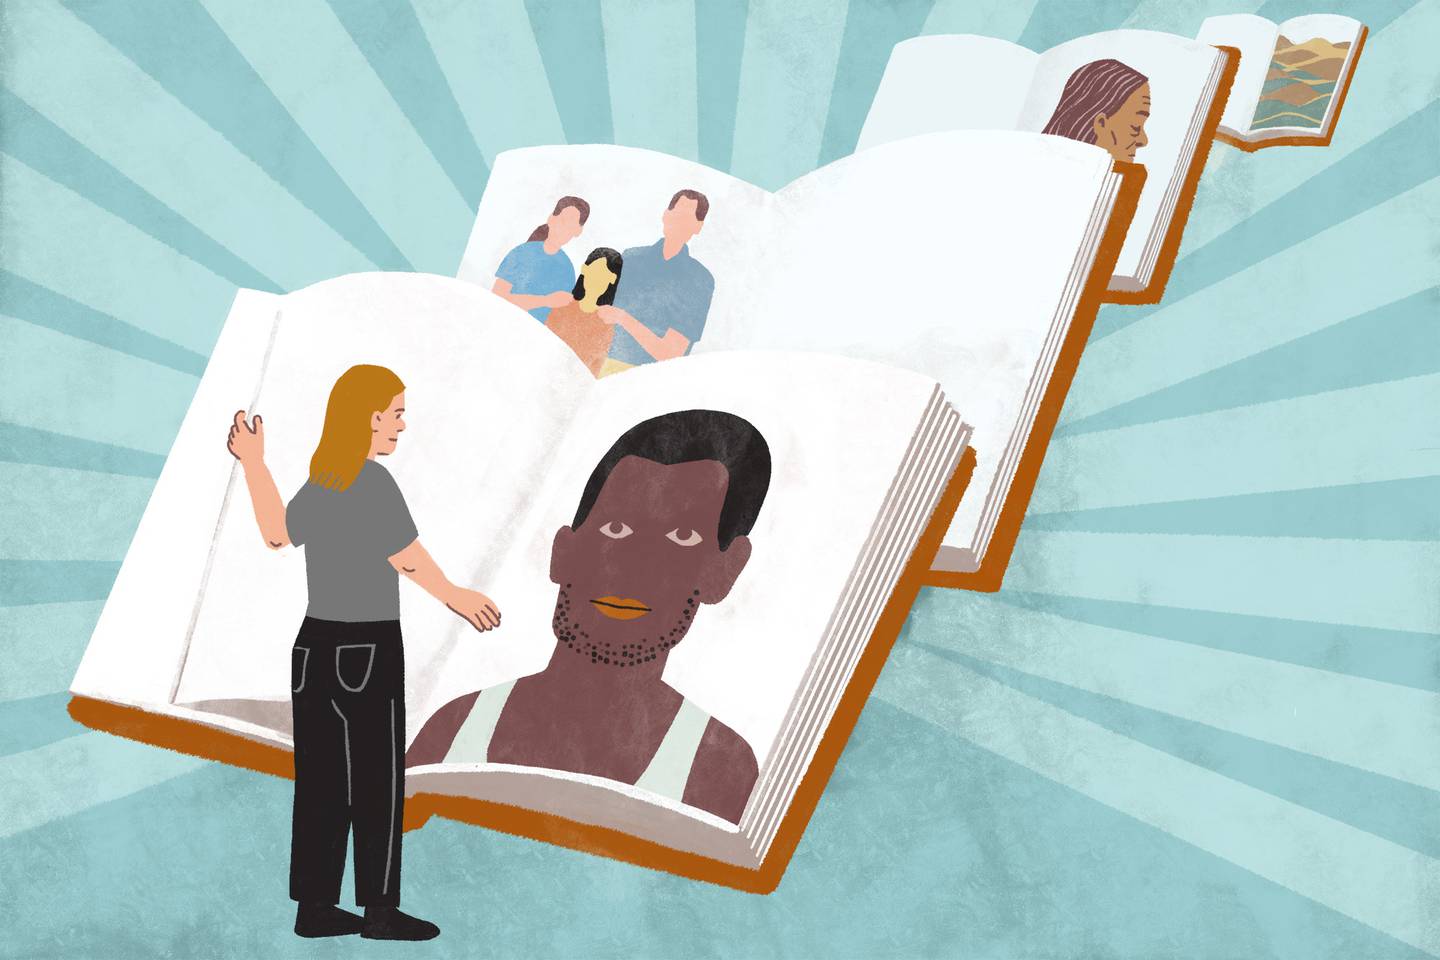 Illustration of white woman holding open book, looking at image of Black gender nonconforming person; open books in background recede diagonally, showing images of adopted East Asian daughter with white parents; an older woman of color; and a landscape.